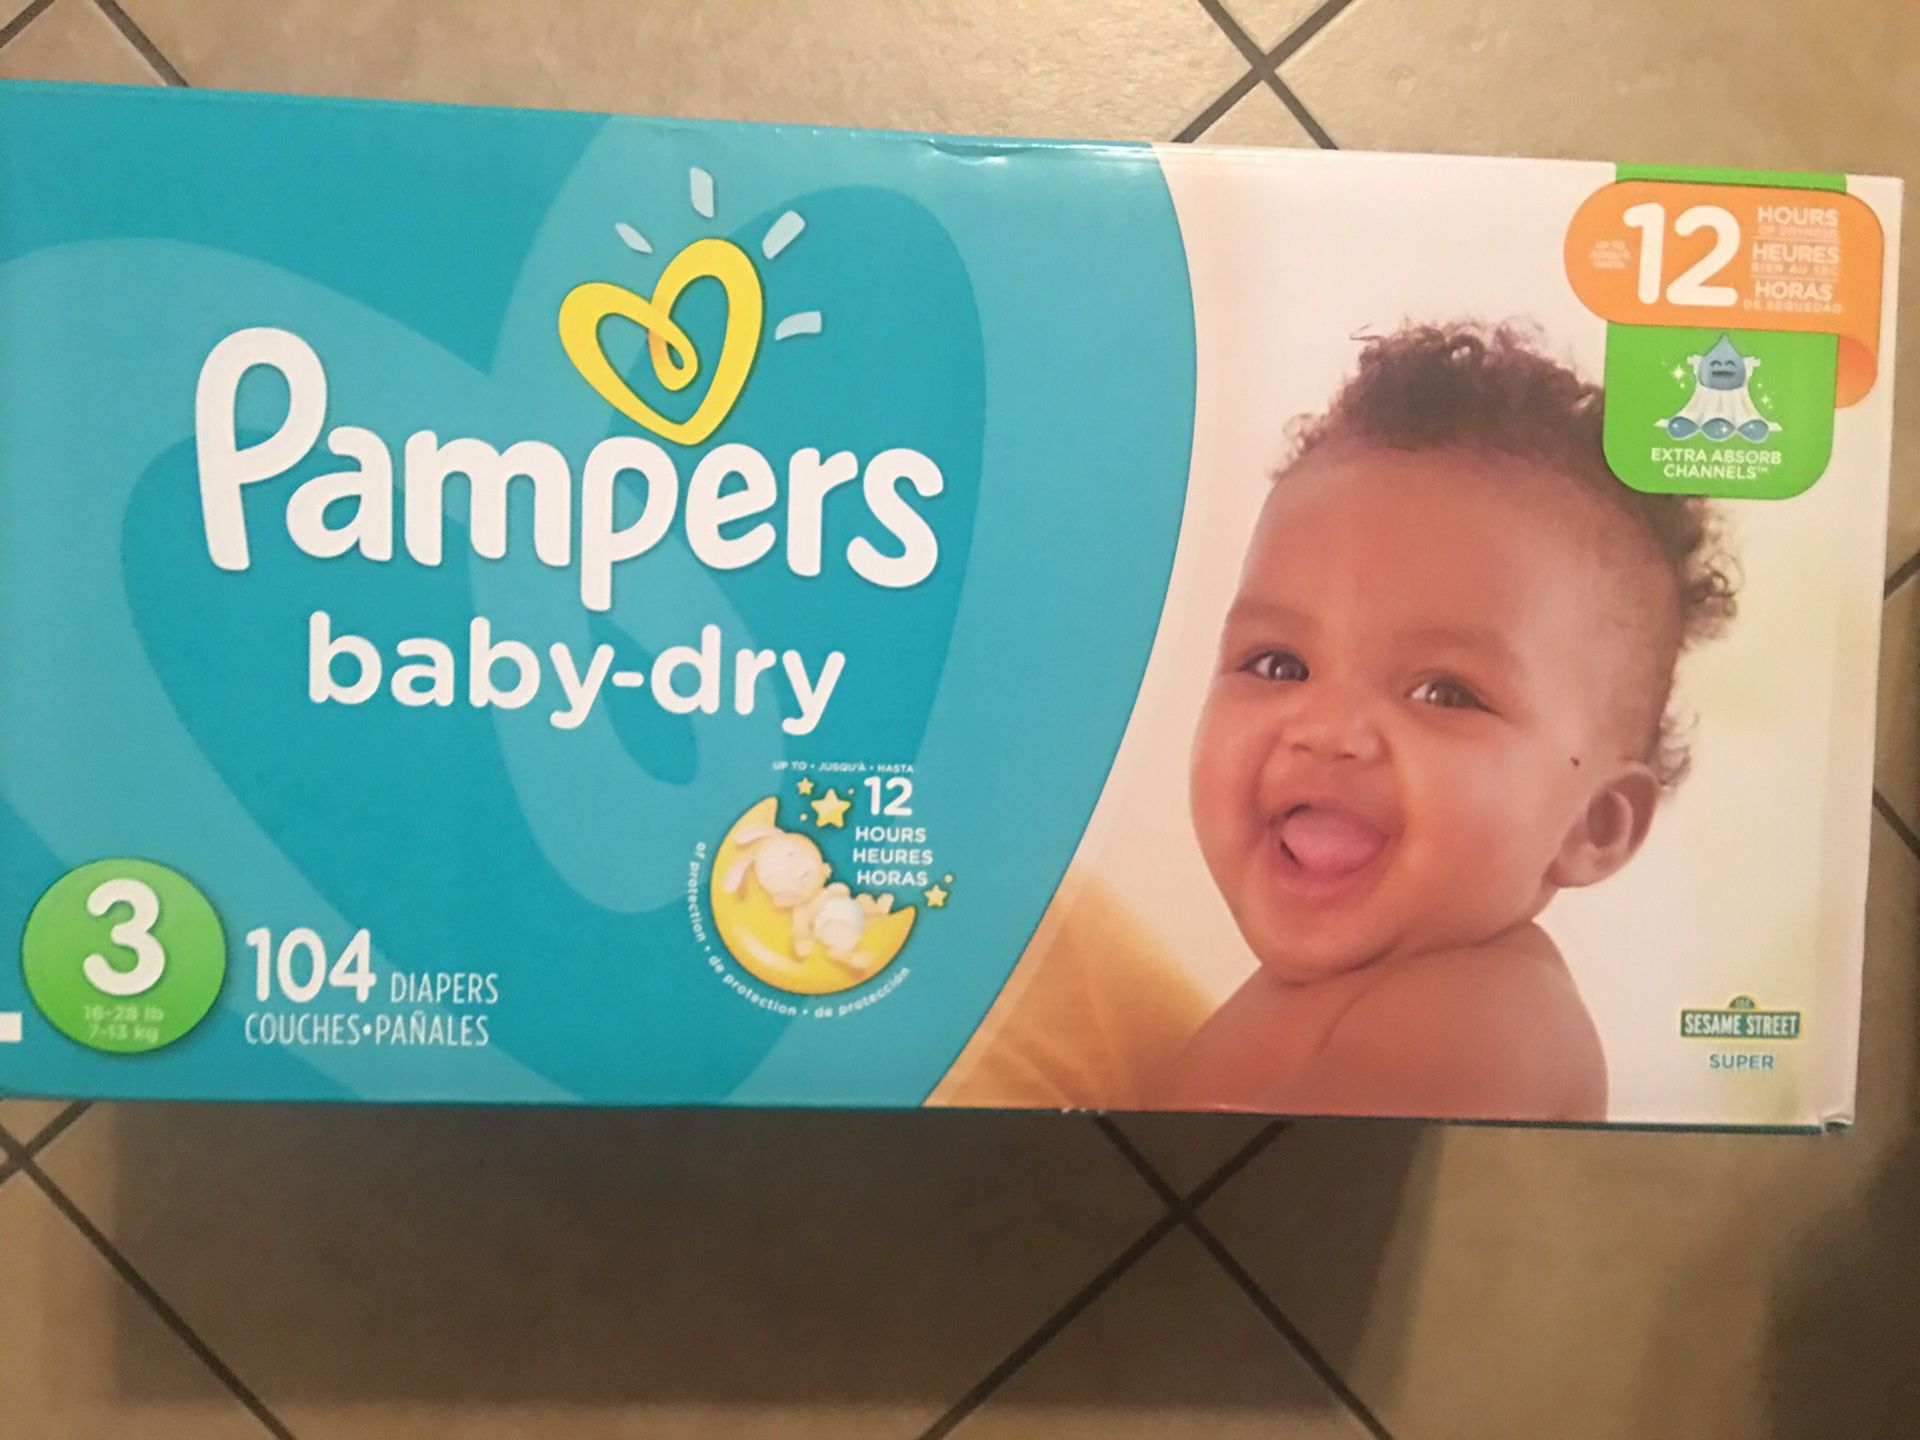 Pampers box size 3